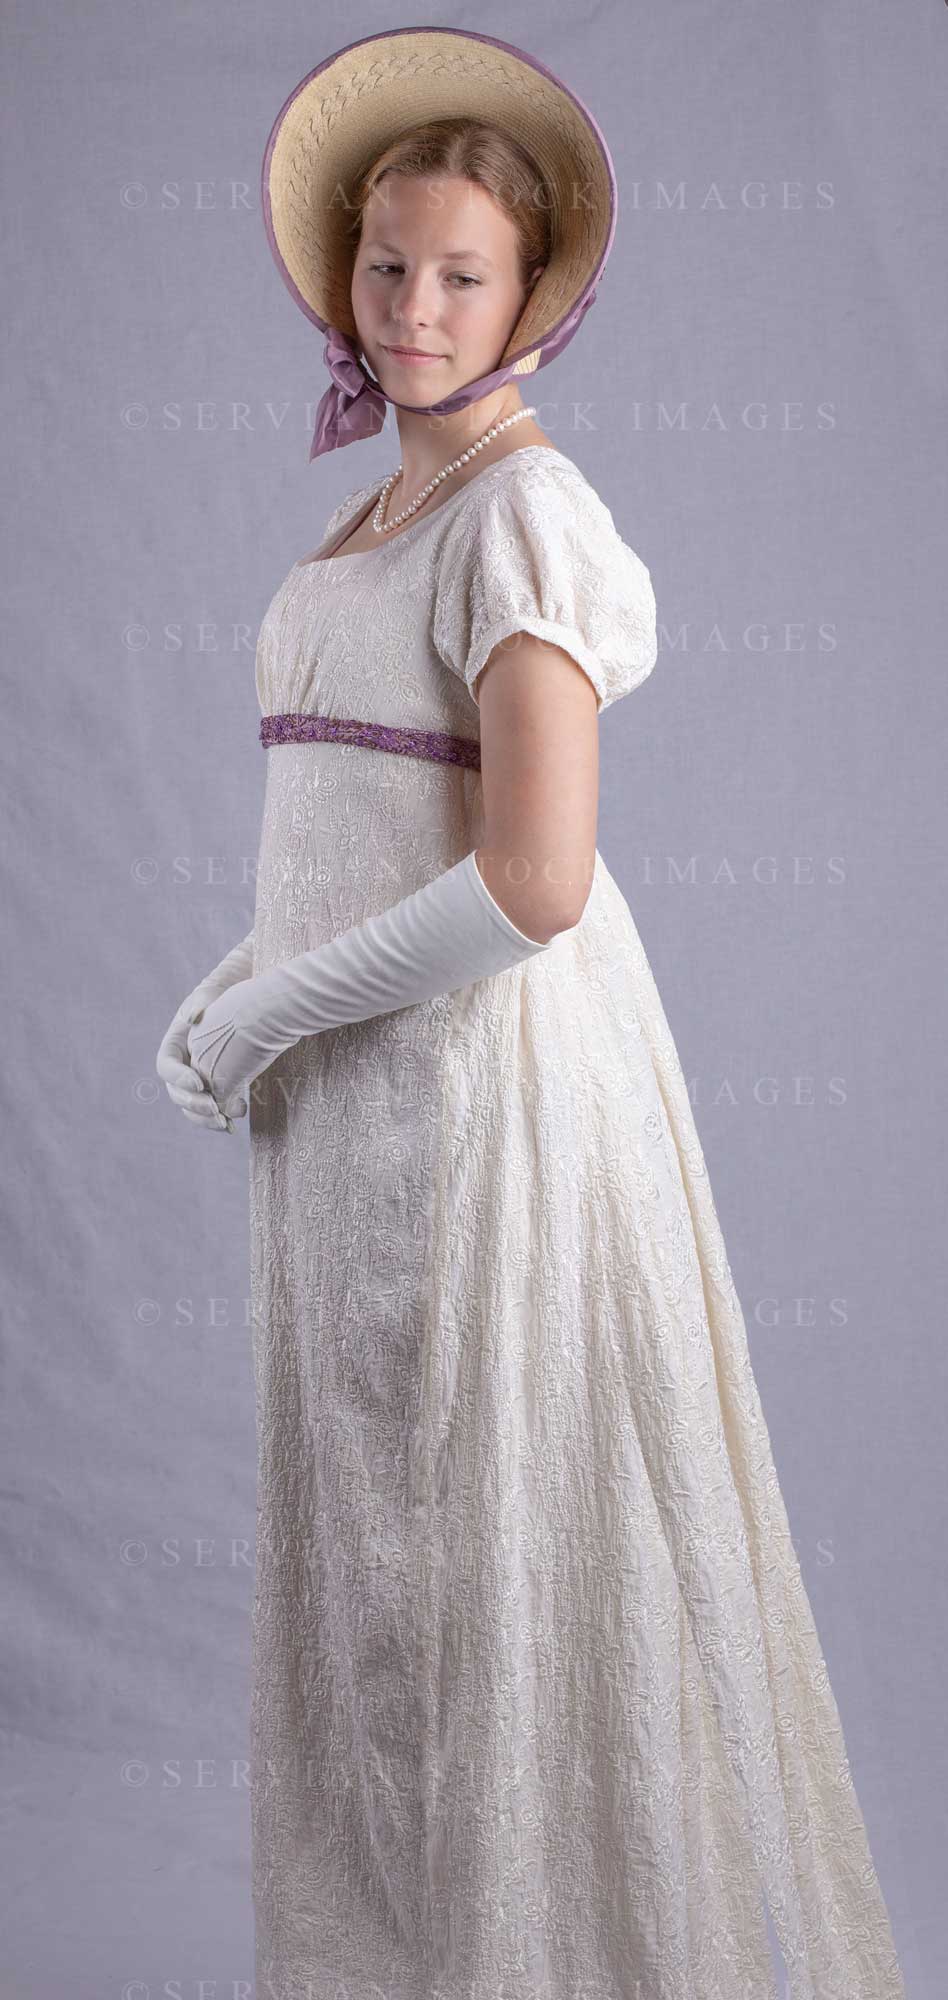 Regency woman in a cream embroidered dress and long gloves (Skye 0034)